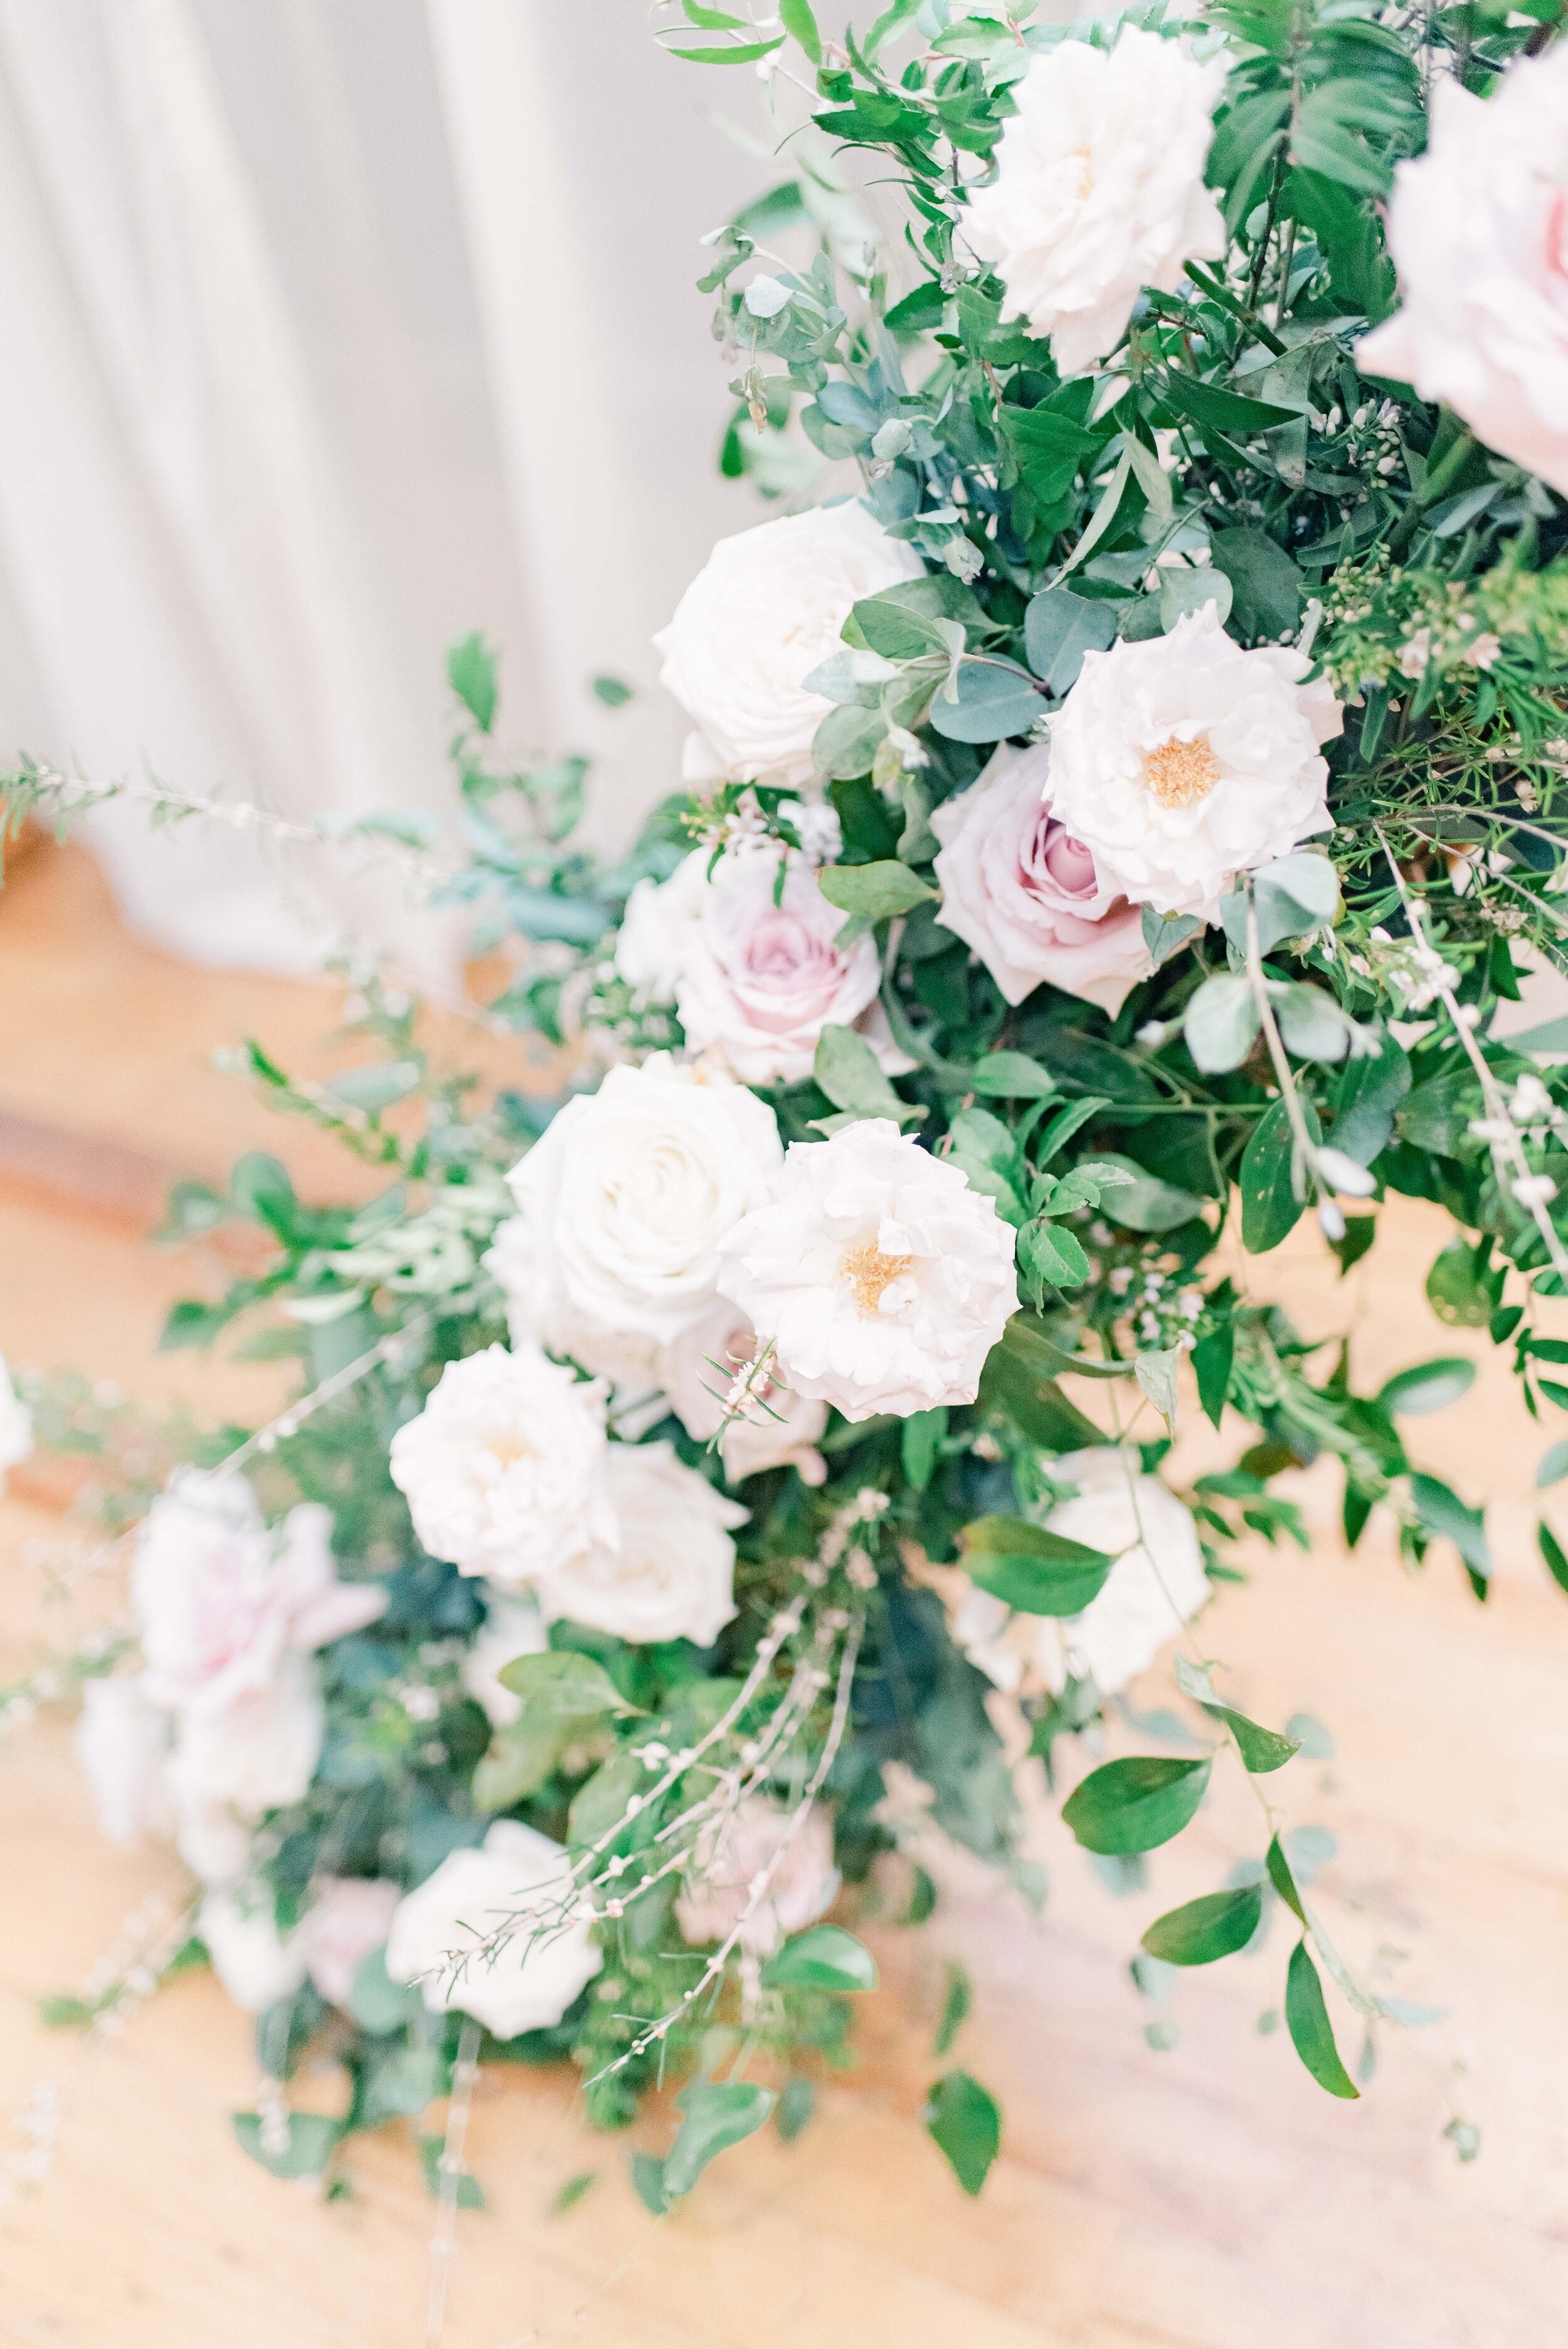 This wedding had a gorgeous soft summer palette of cream, blush, and sage. It was filled with delicate, thoughtful touches.  Designed by florist Rosemary & Finch in Nashville, TN.